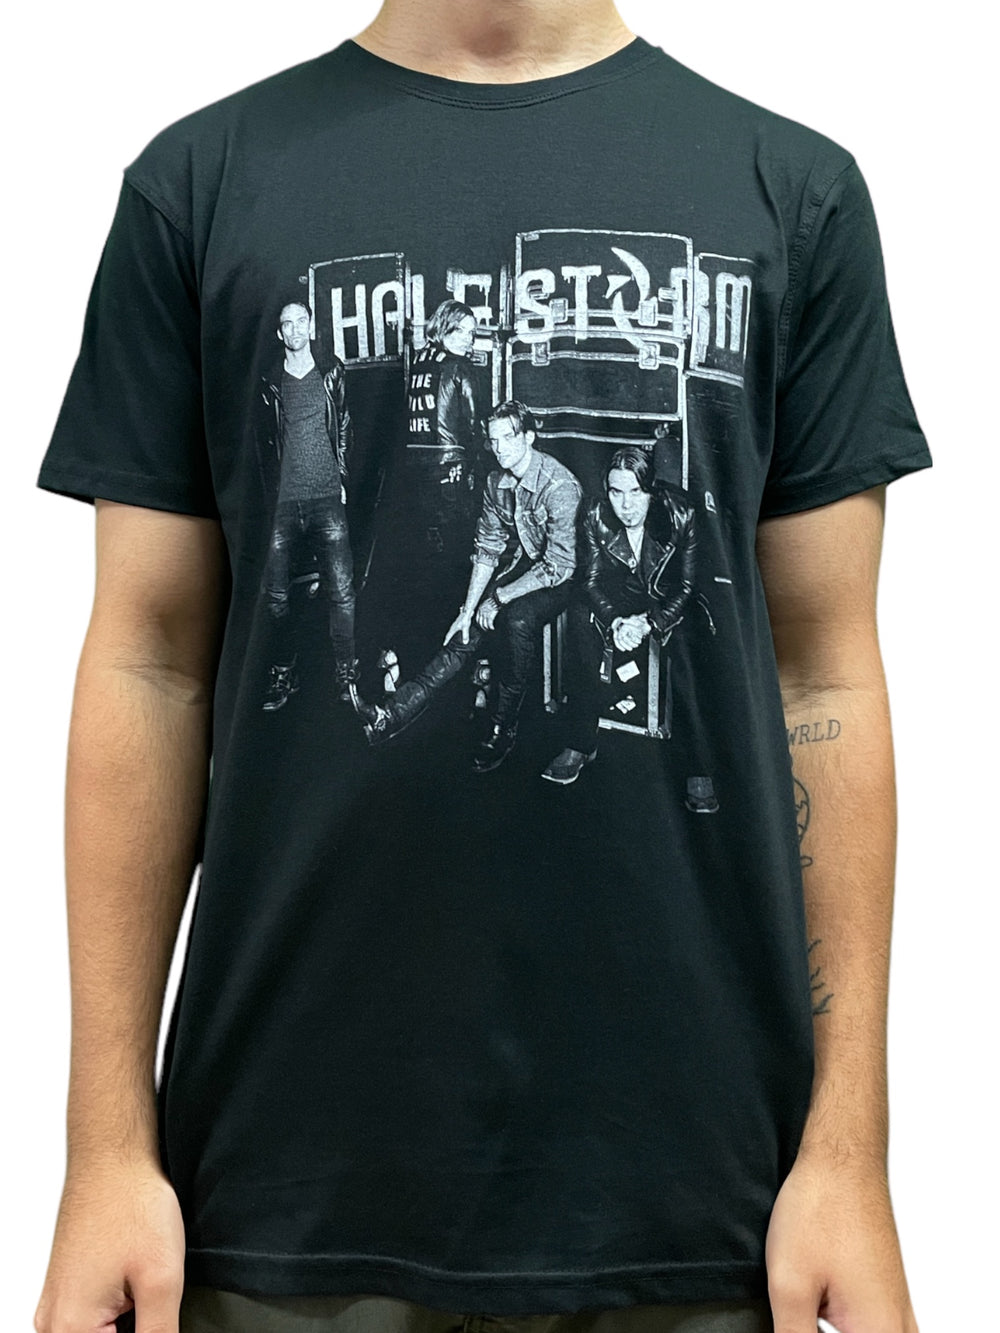 Halestorm The Wild Cover Unisex Official T Shirt Brand New Various Sizes